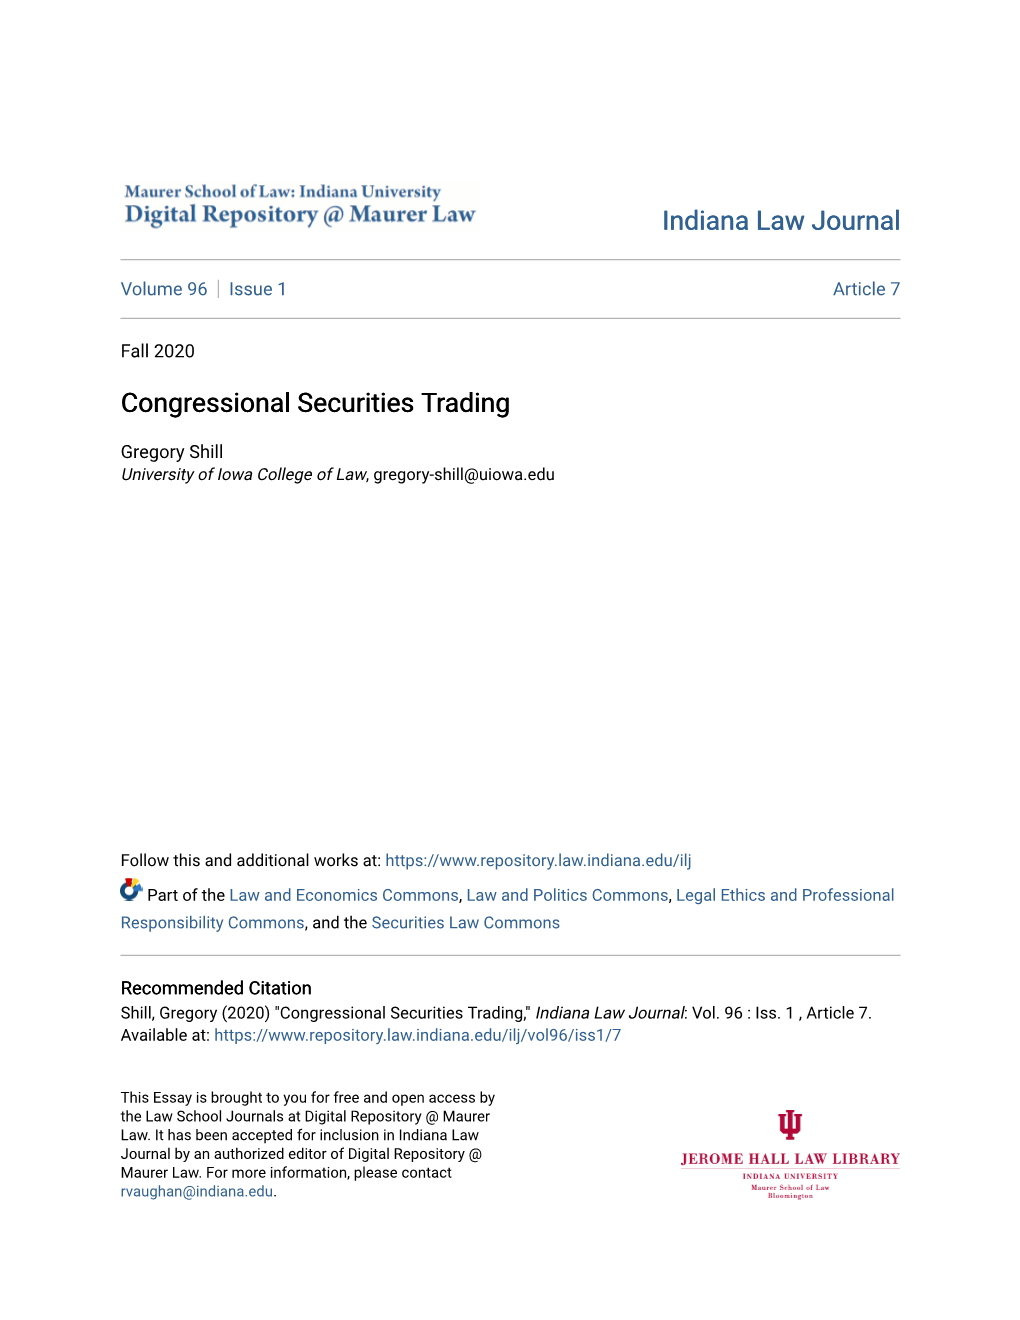 Congressional Securities Trading